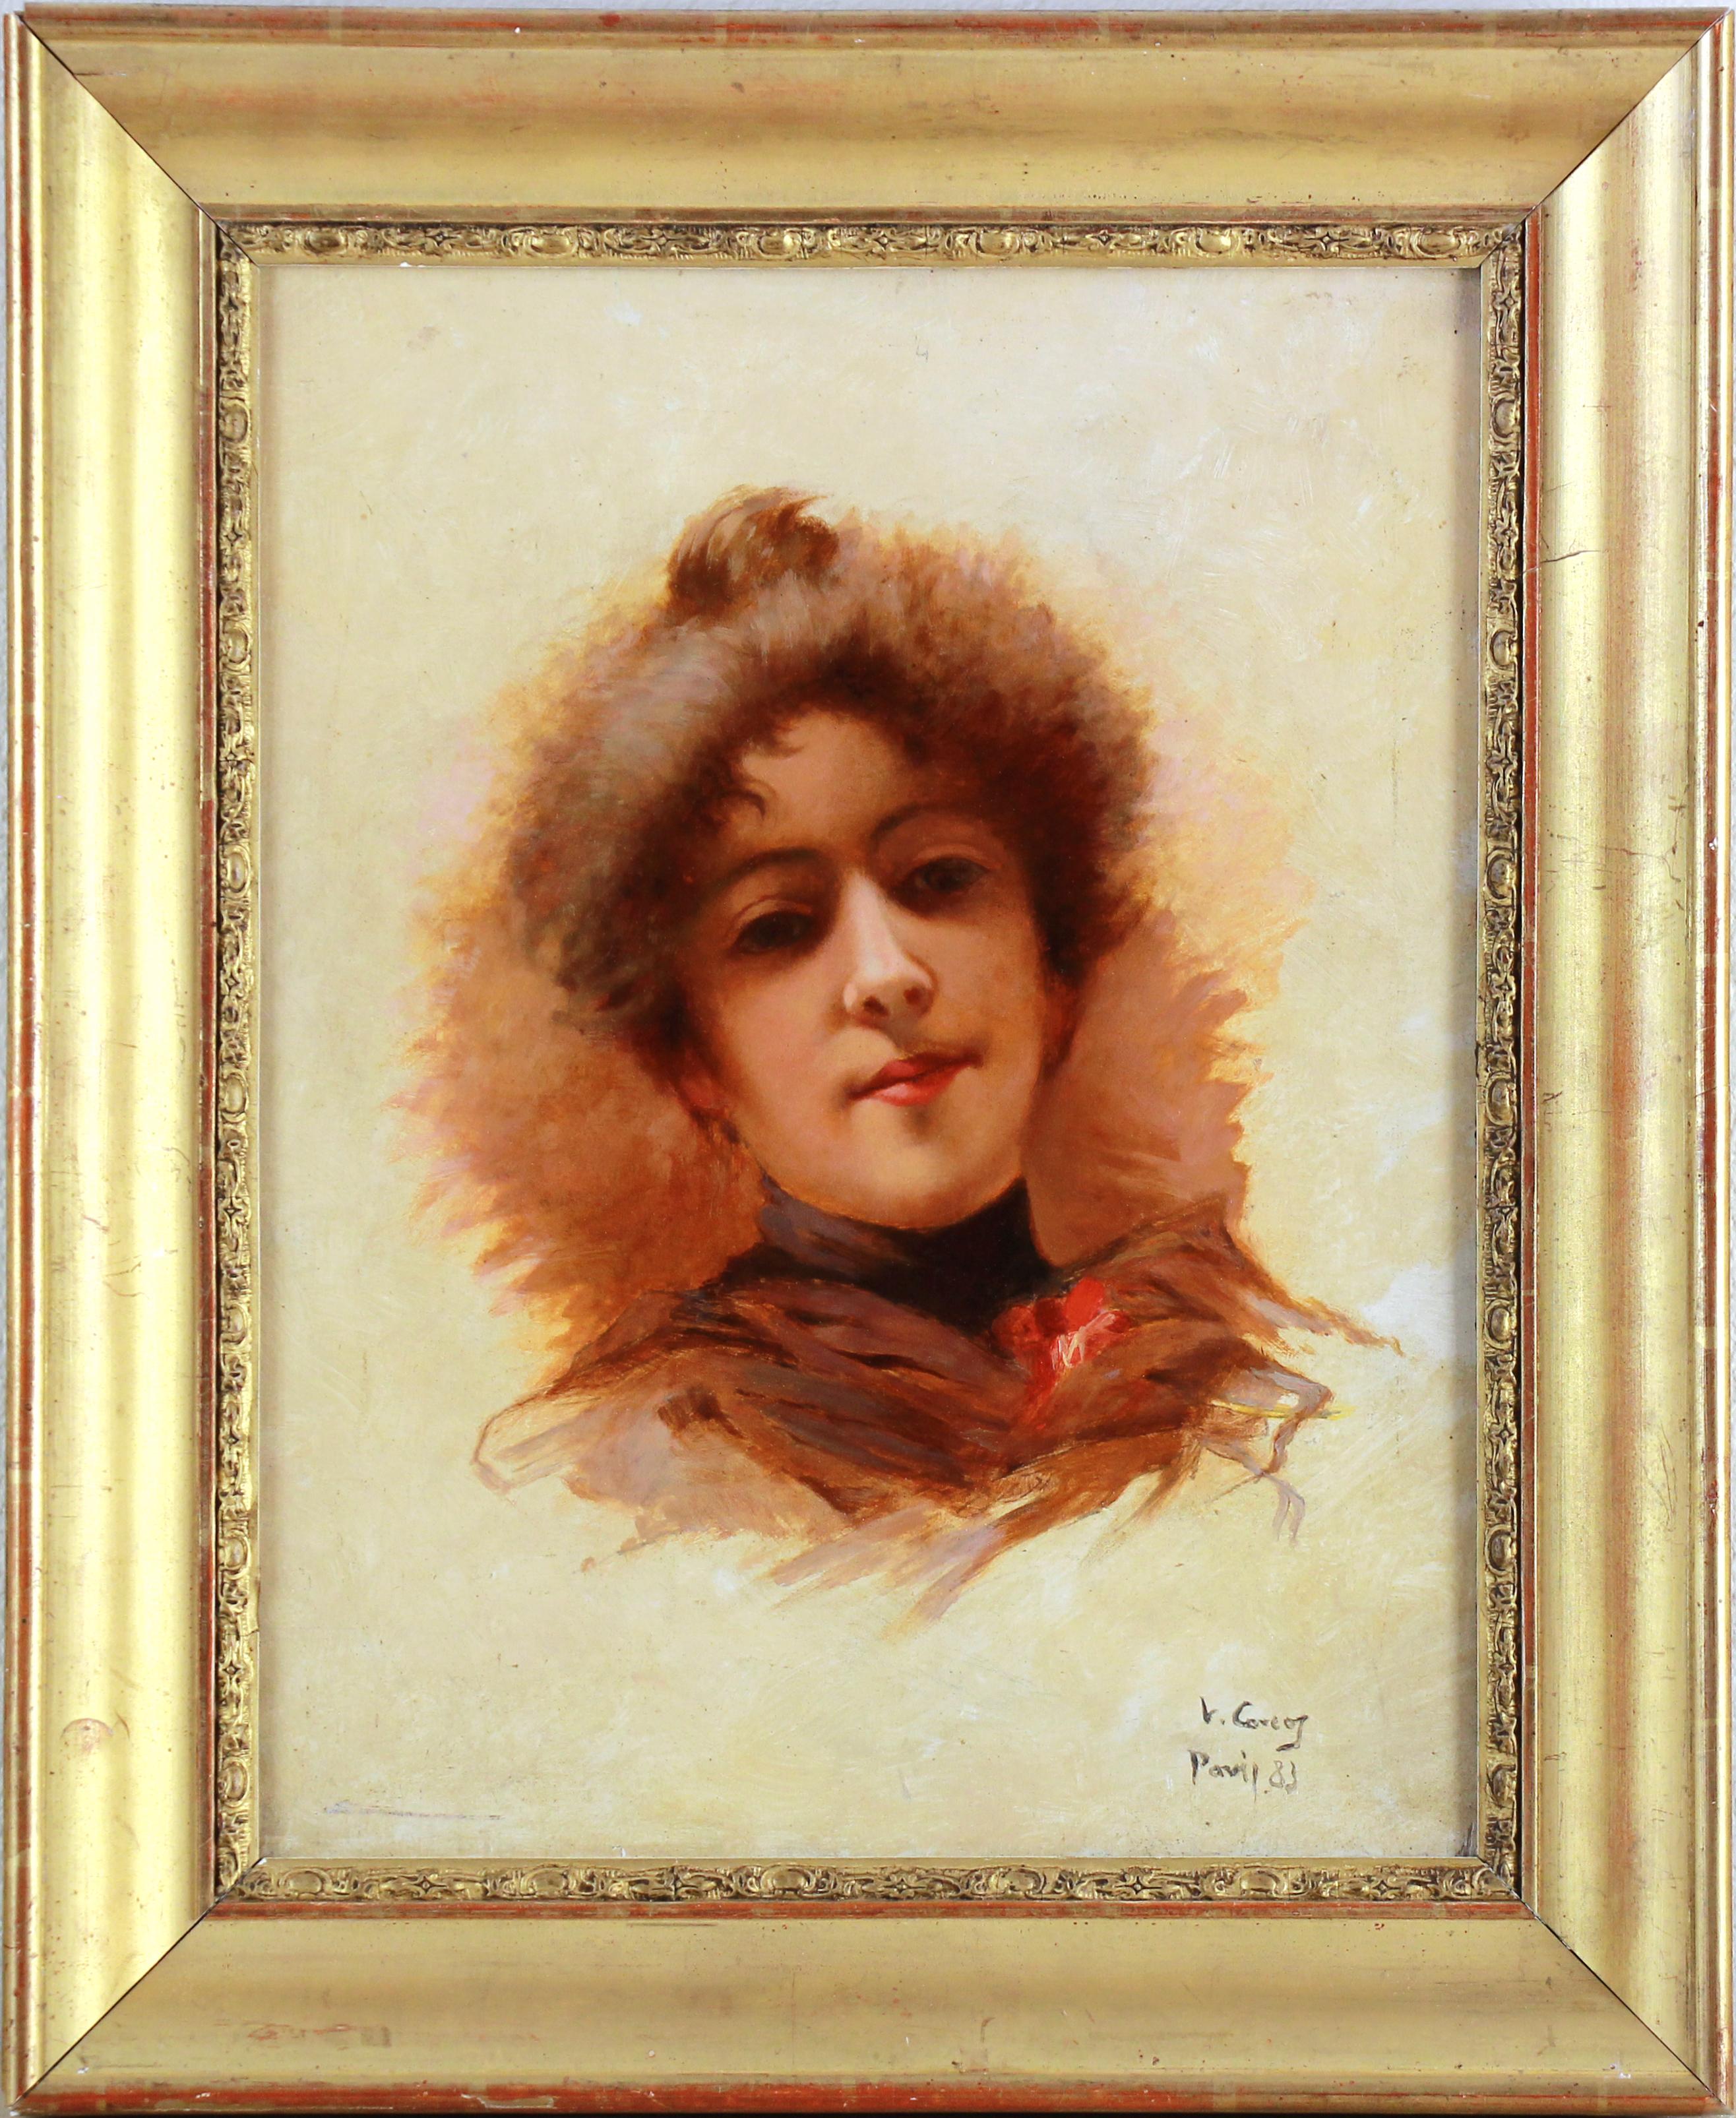 Vittorio Matteo Corcos ( 1859-1933) oil on panel sketch study

Vittorio Matteo Corcos,  famous Italian artist , Art Nouveau portrait oil on panel ” sketch study ”  .
Art Nouveau style, very rare to find such a nice example of it .
The painting is